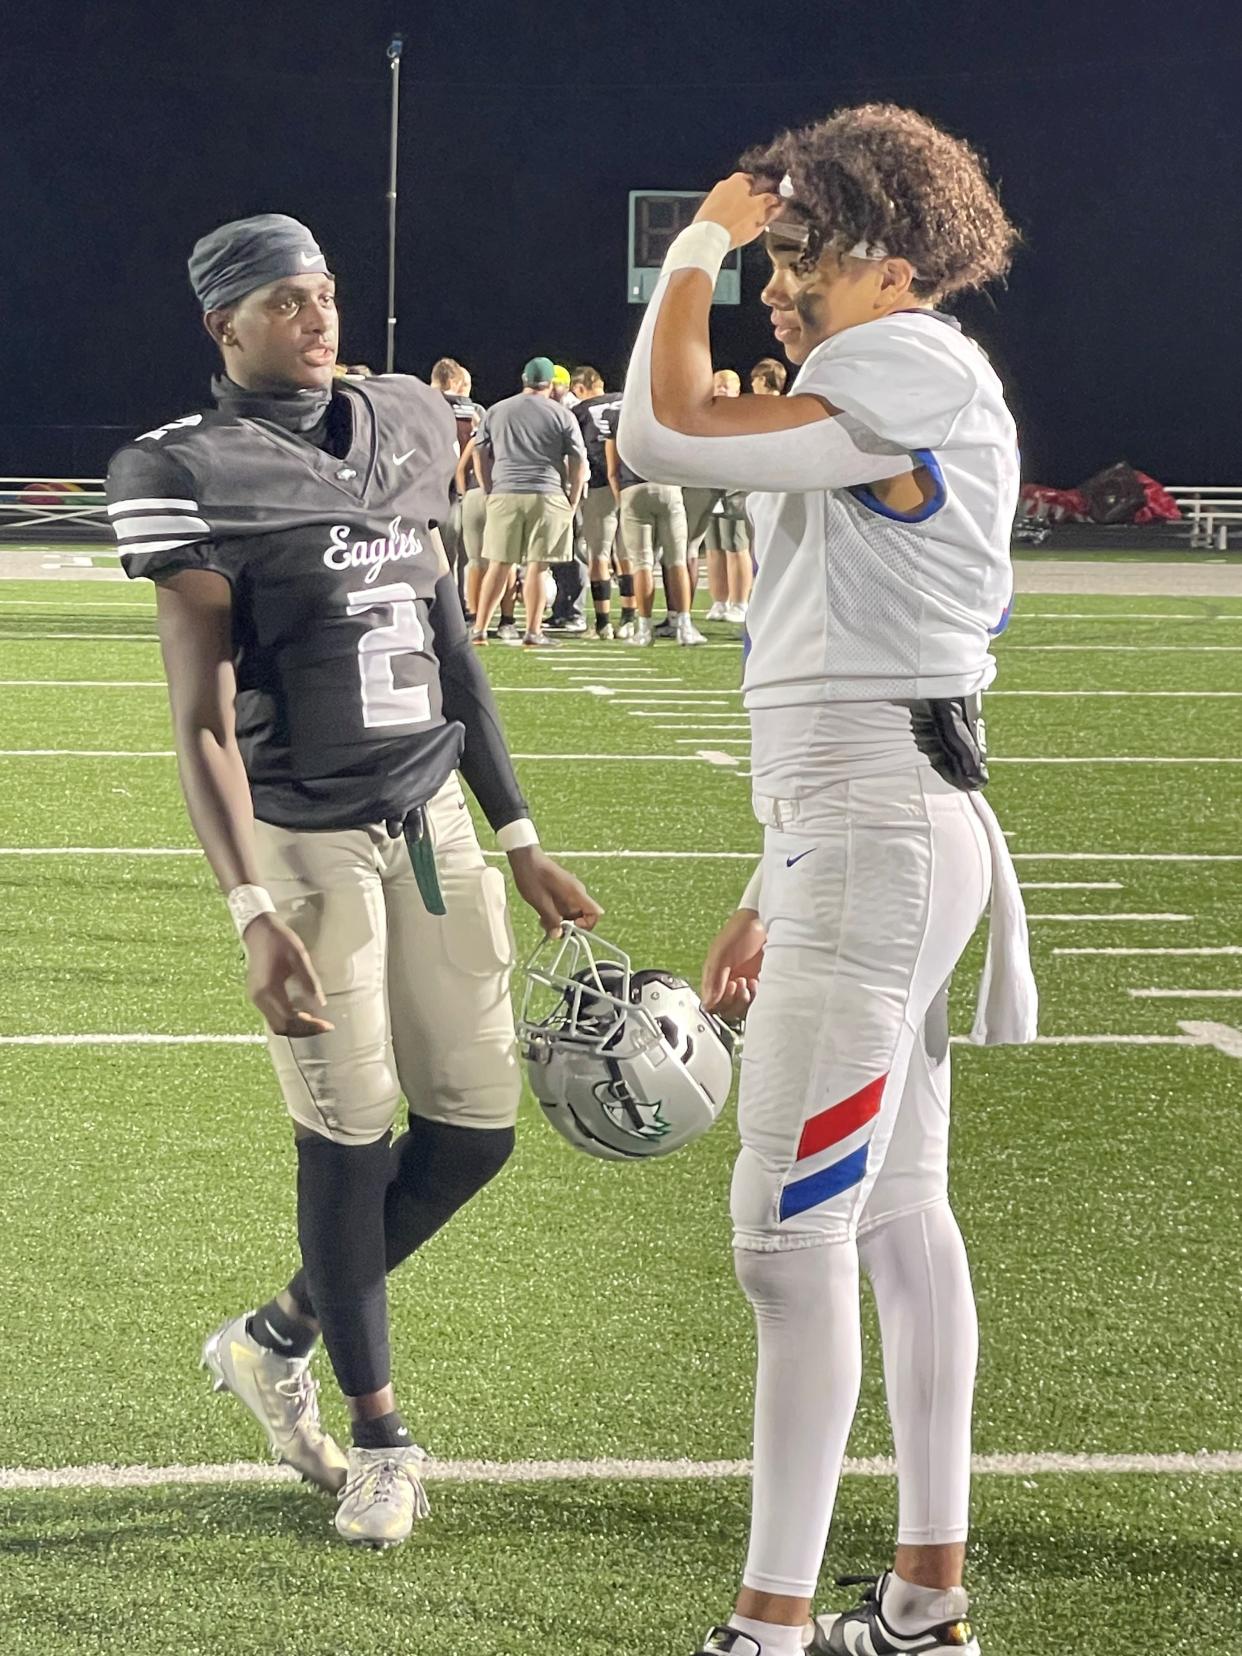 Zionsville receiver Eugene Hilton Jr. (left) and HSE receiver Donovan Hamilton (right) meet at midfield after both put on a show in the Royals' win Friday night.